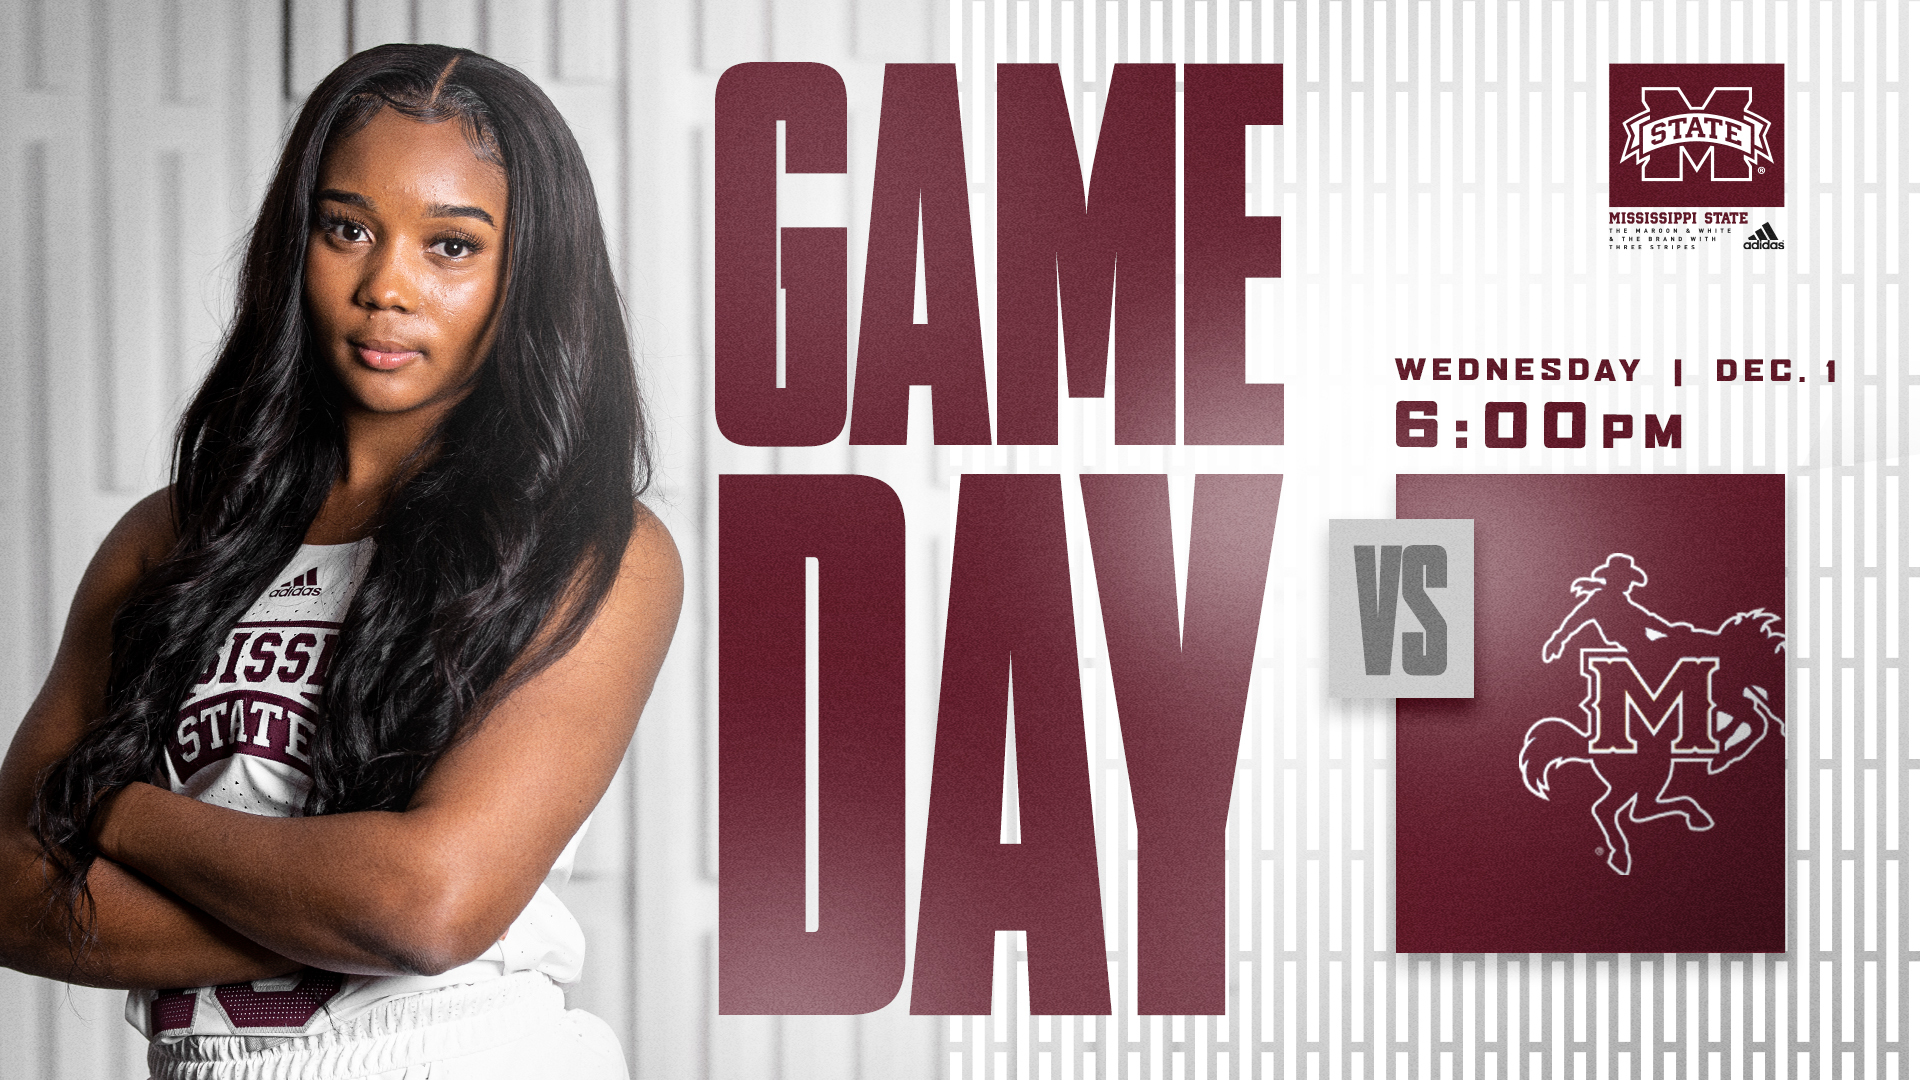 Maroon and white game day graphic with image of MSU women's basketball player Aislynn Hayes